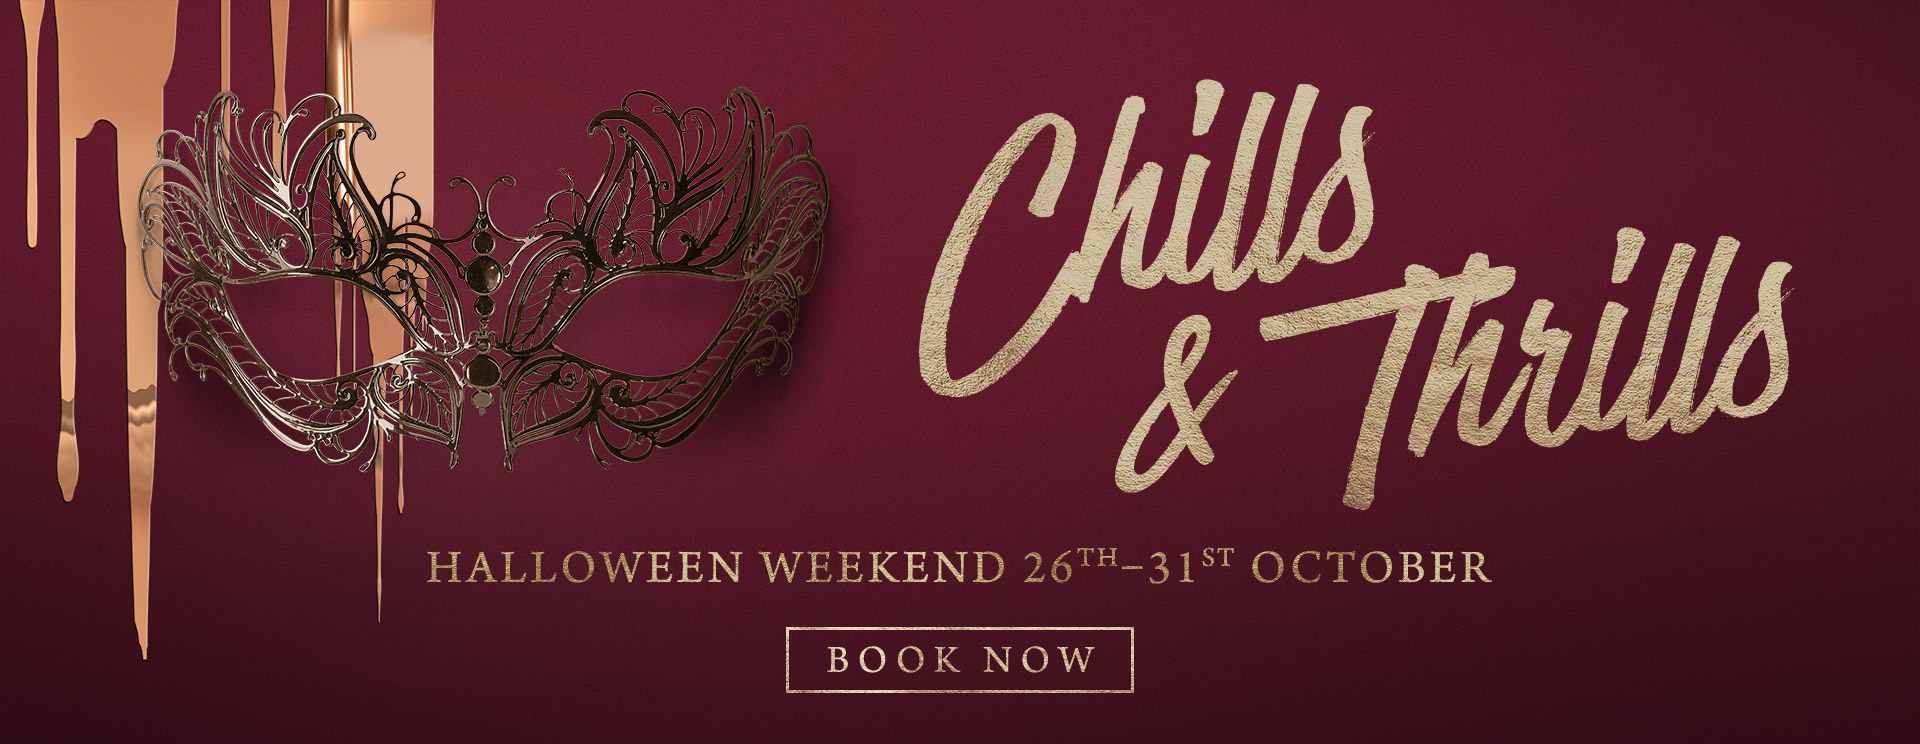 Chills & Thrills this Halloween at The Chilworth Arms